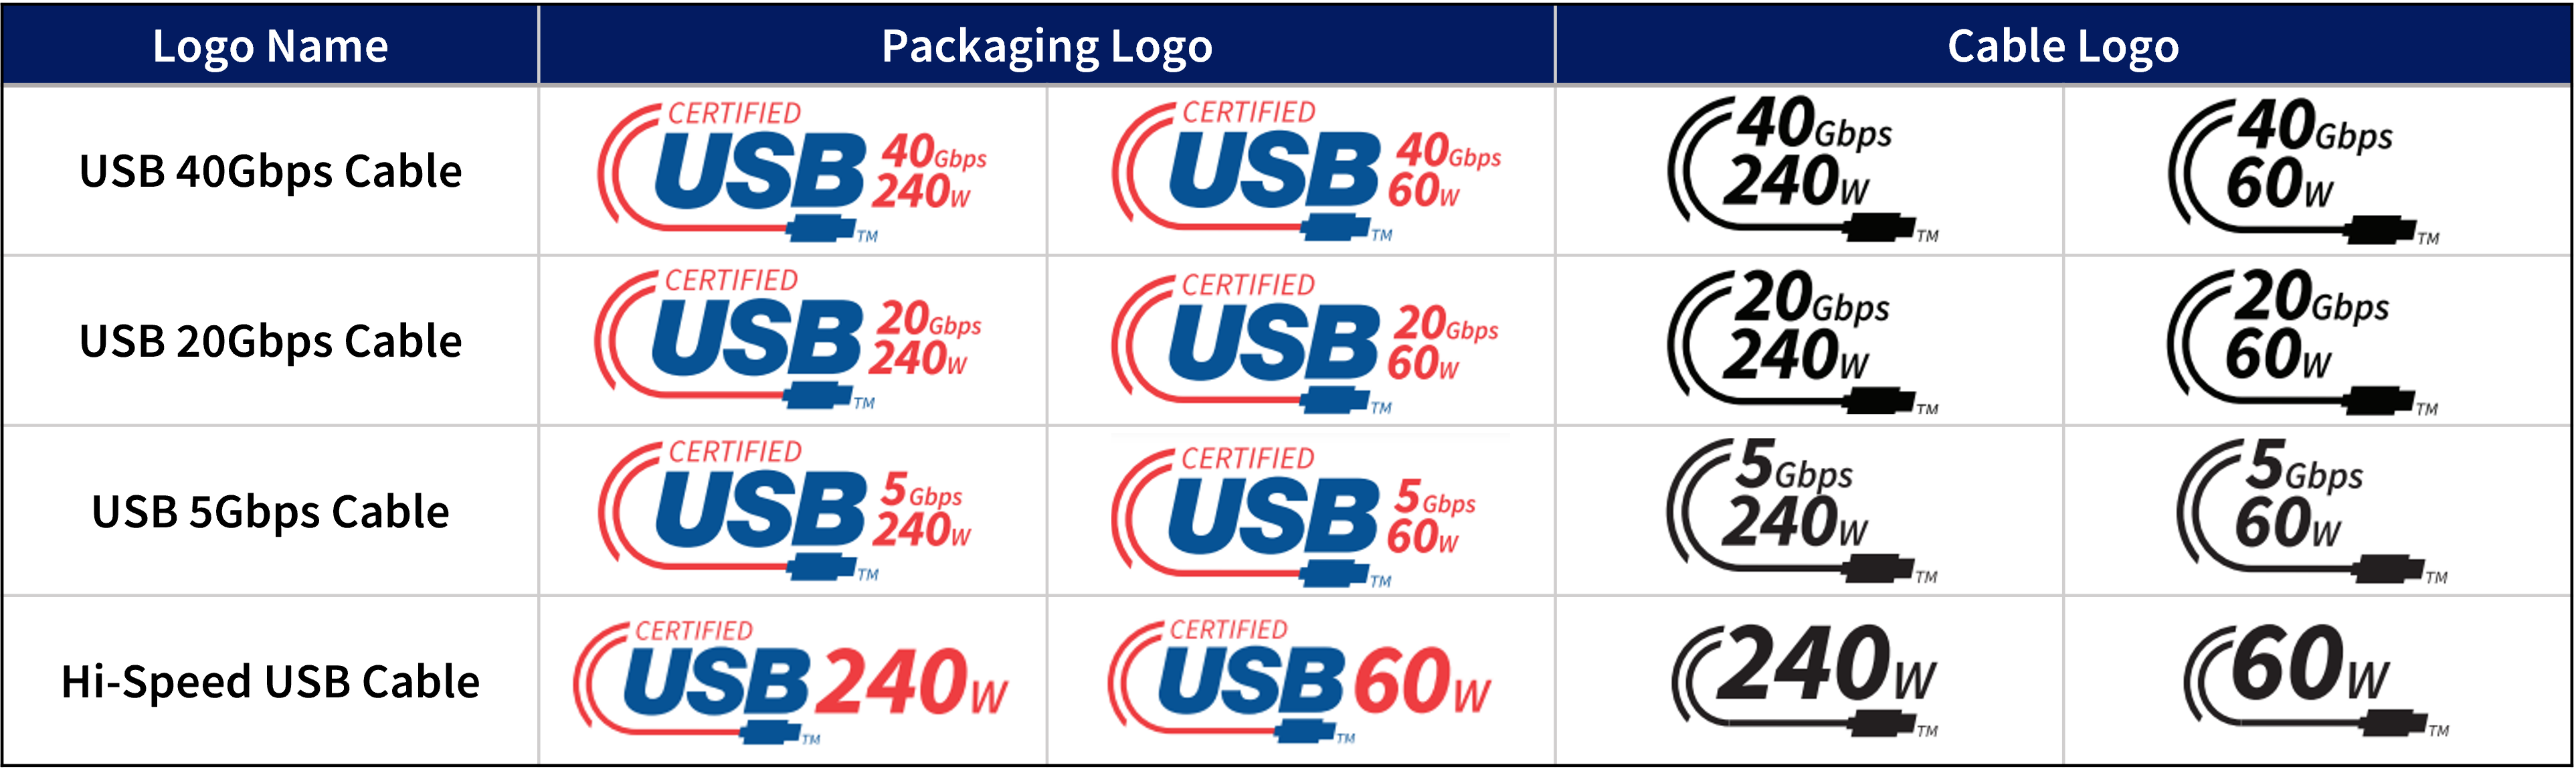 USB logo-2-Type C Cable